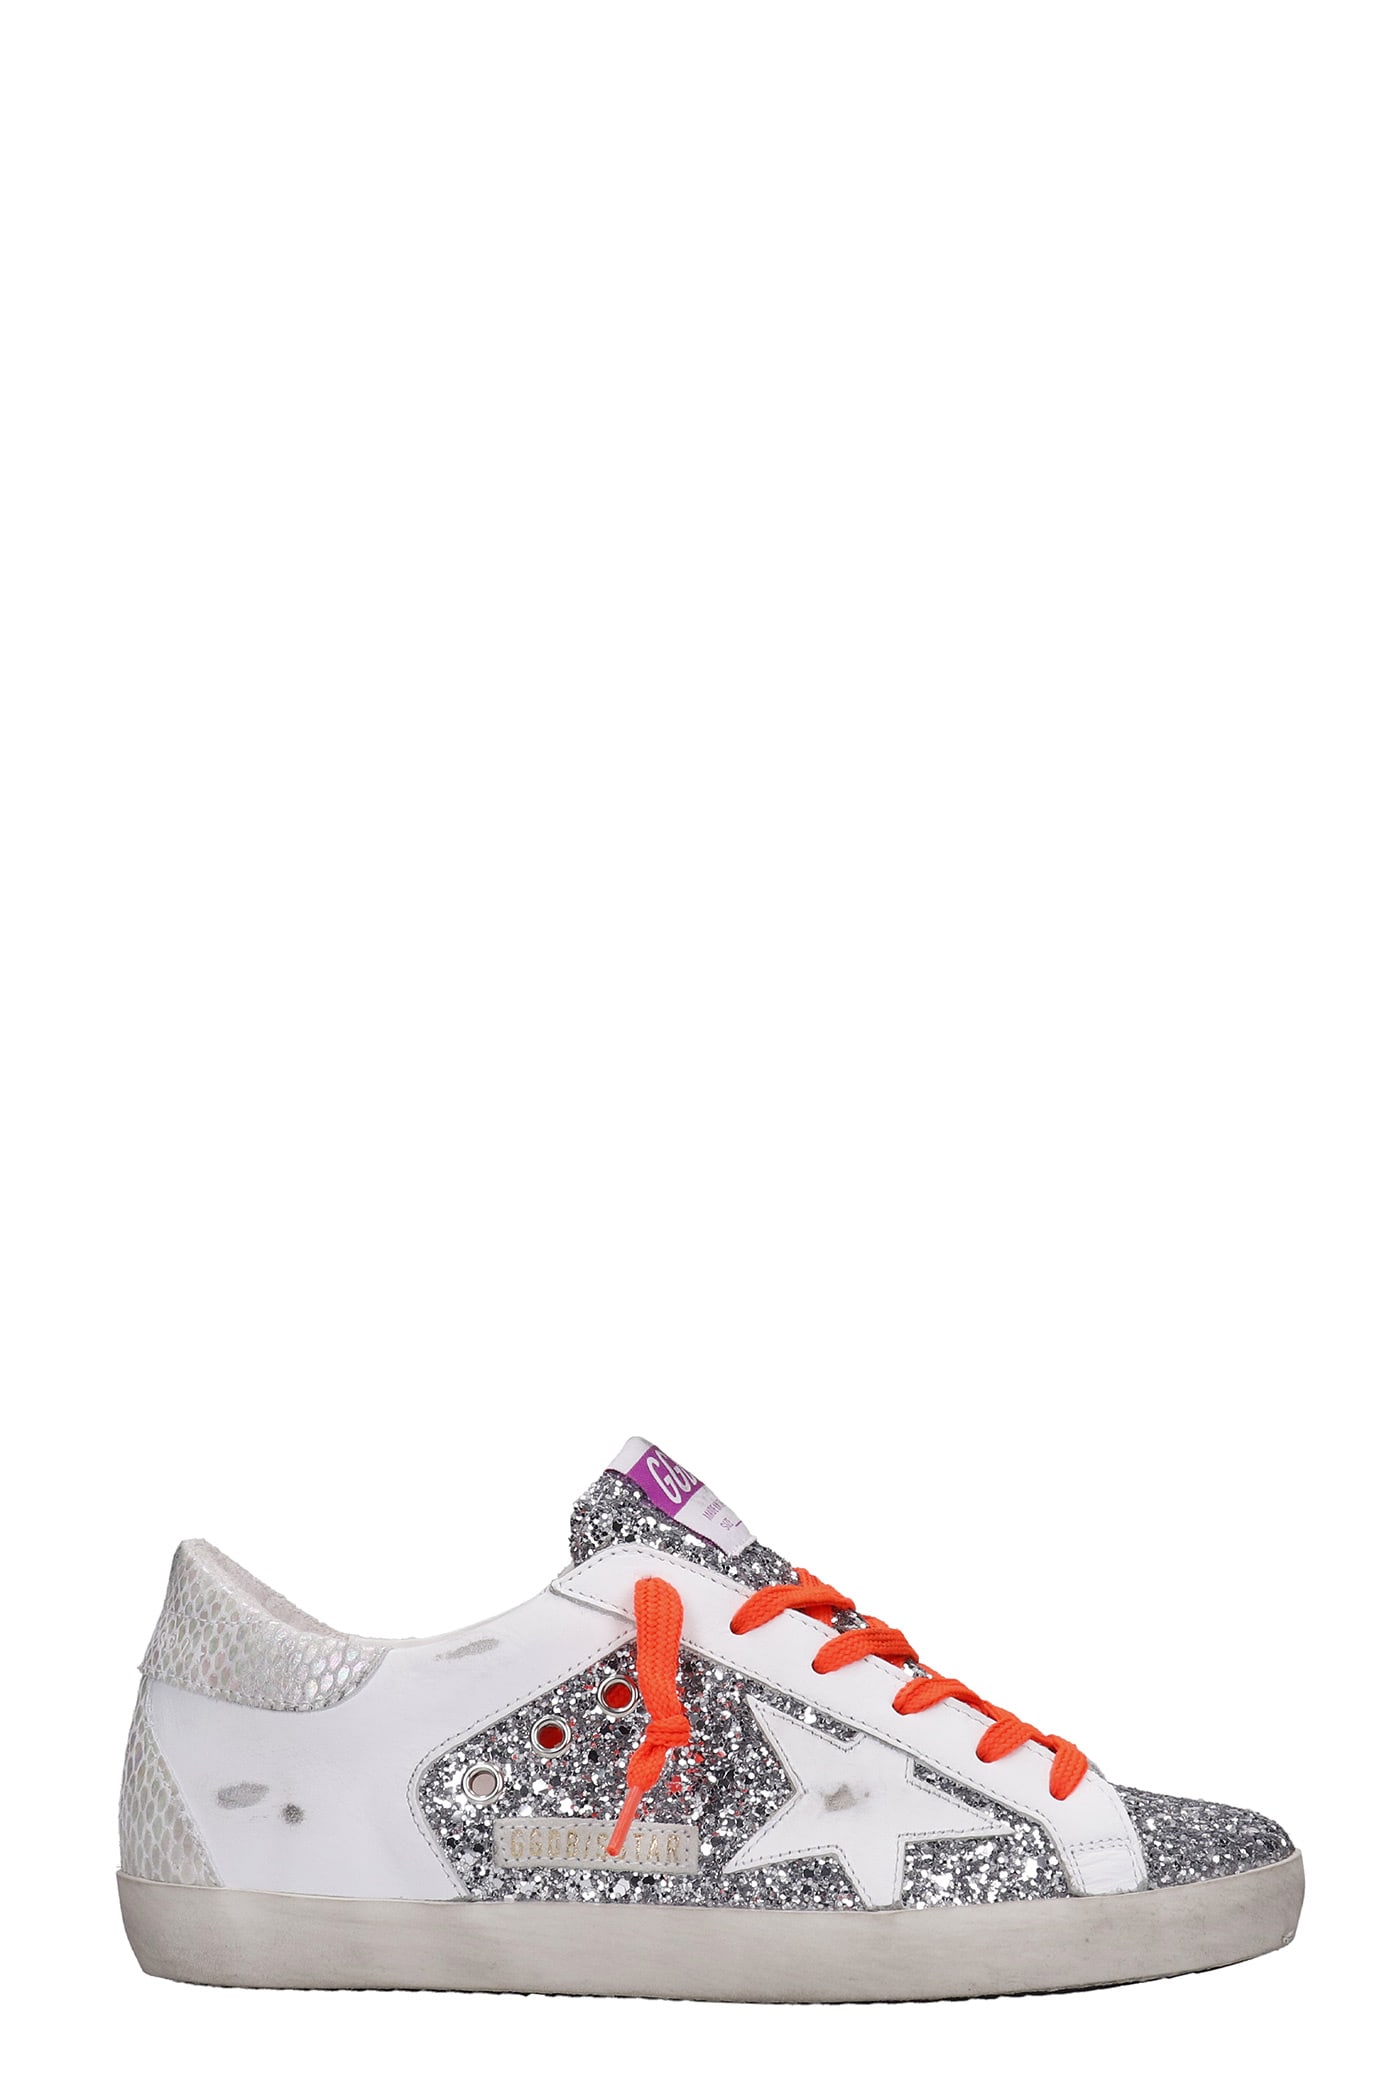 Buy Golden Goose Superstar Sneakers In White Glitter online, shop Golden Goose shoes with free shipping